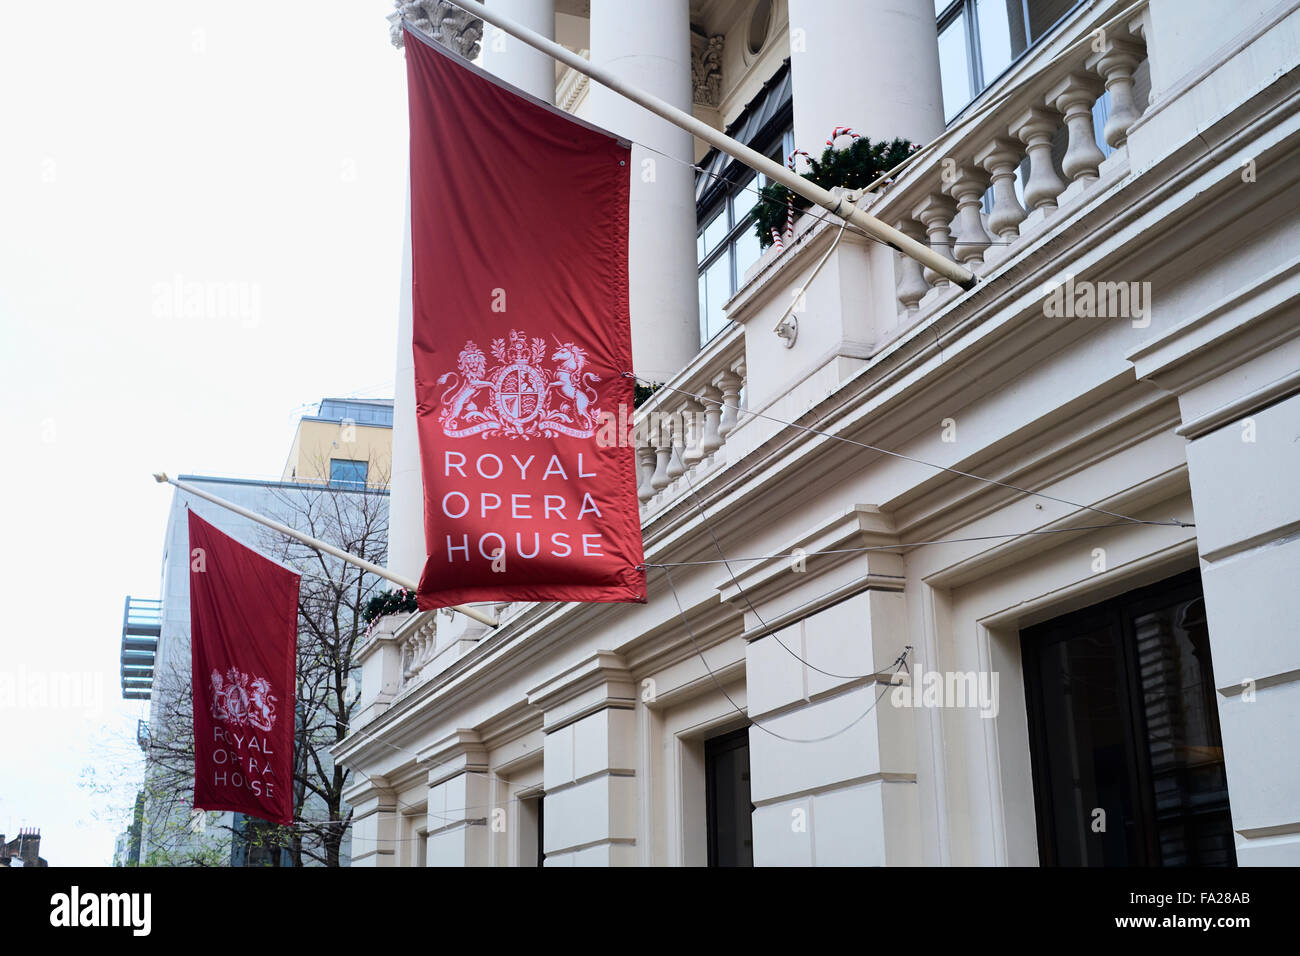 LONDON, UK - DECEMBER 20: Large red banners in front of the Royal Opera House, depicting the Royal coat of arms. December 20, 20 Stock Photo